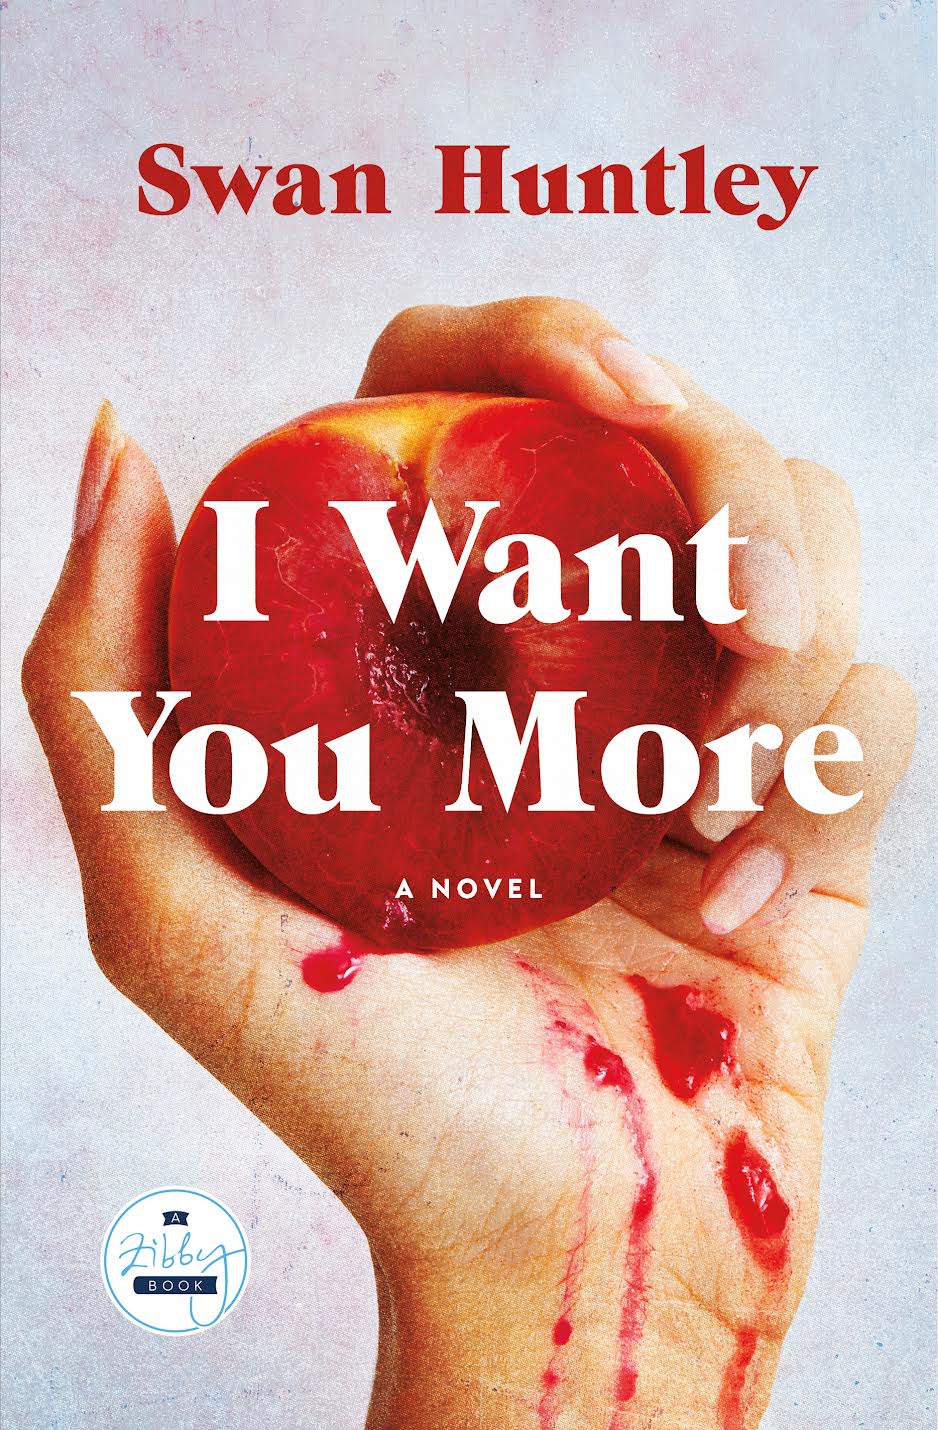 I WANT YOU MORE